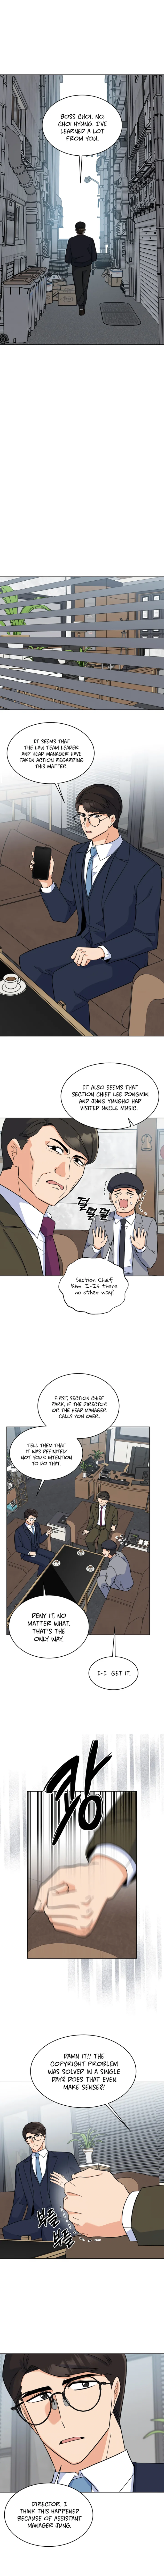 1st year Max Level Manager - Chapter 90 Page 7